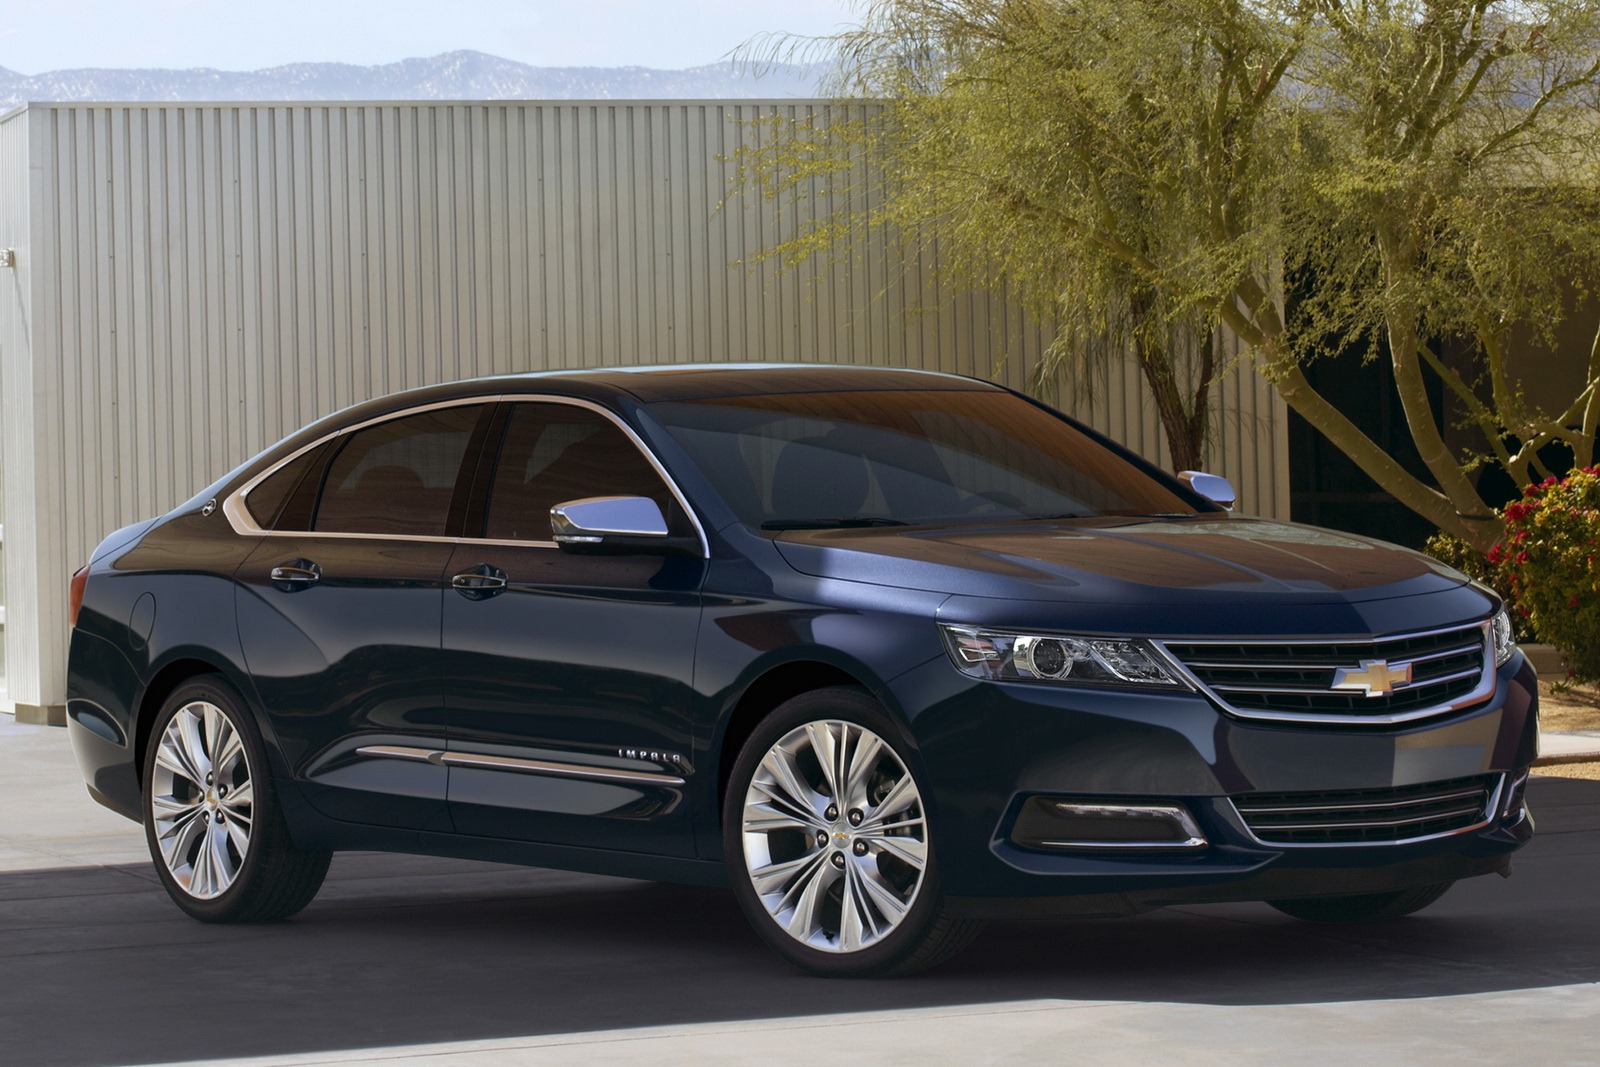 The 2014 Chevrolet Impala reminds me of a Chevy Malibu on Viagra â€“ but in a